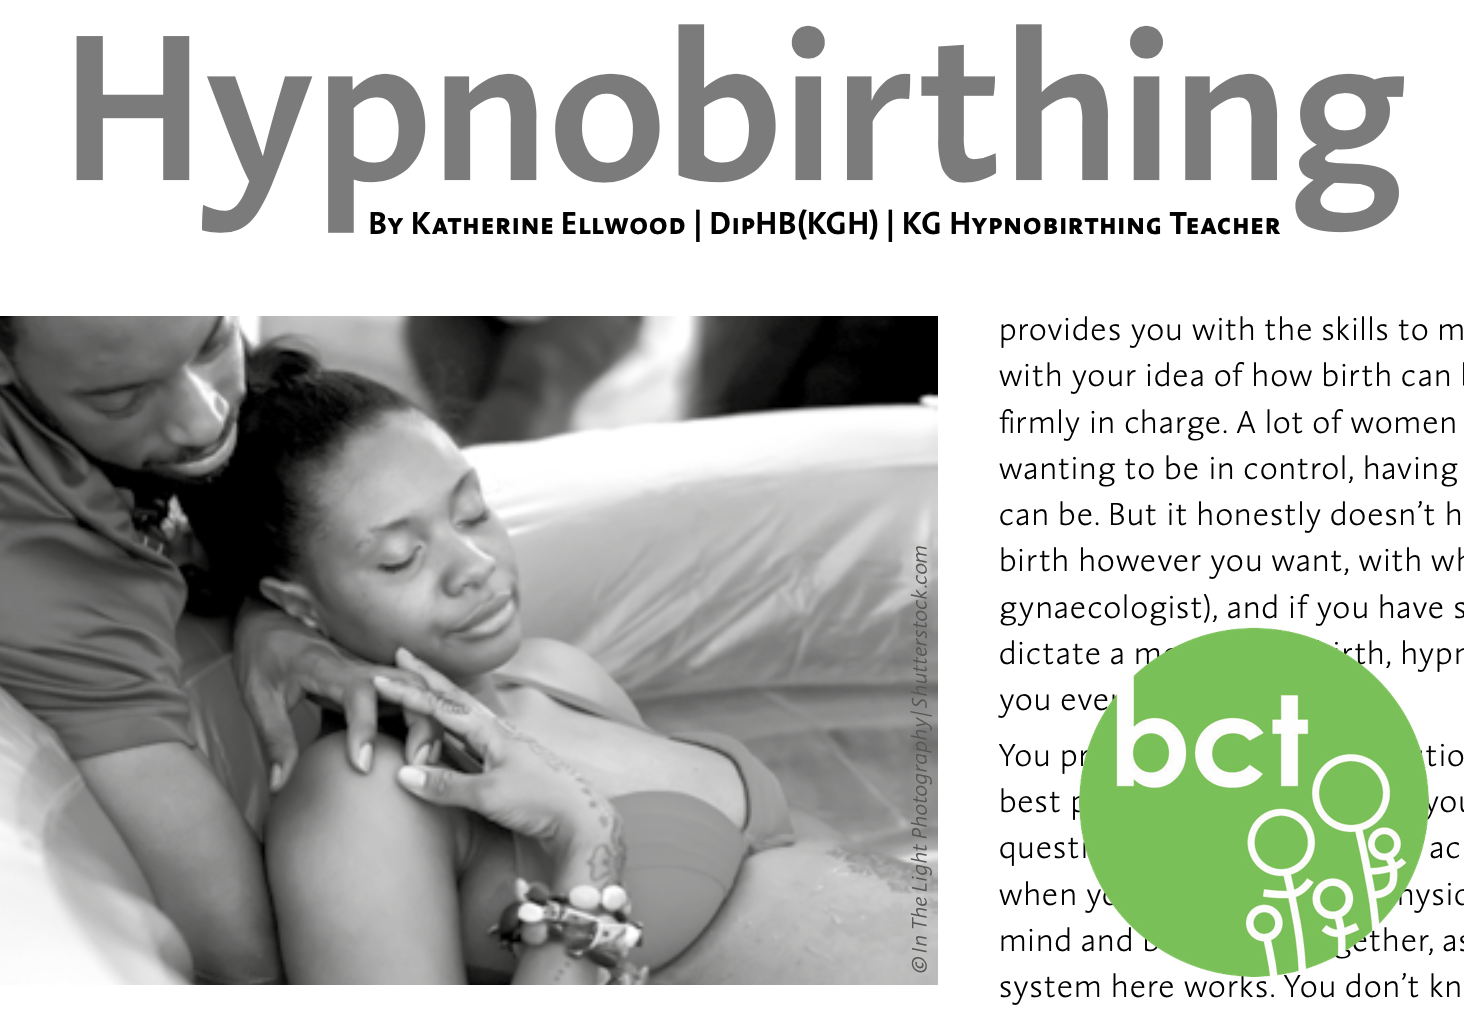 Hypnobirthing article in Small Talk magazine